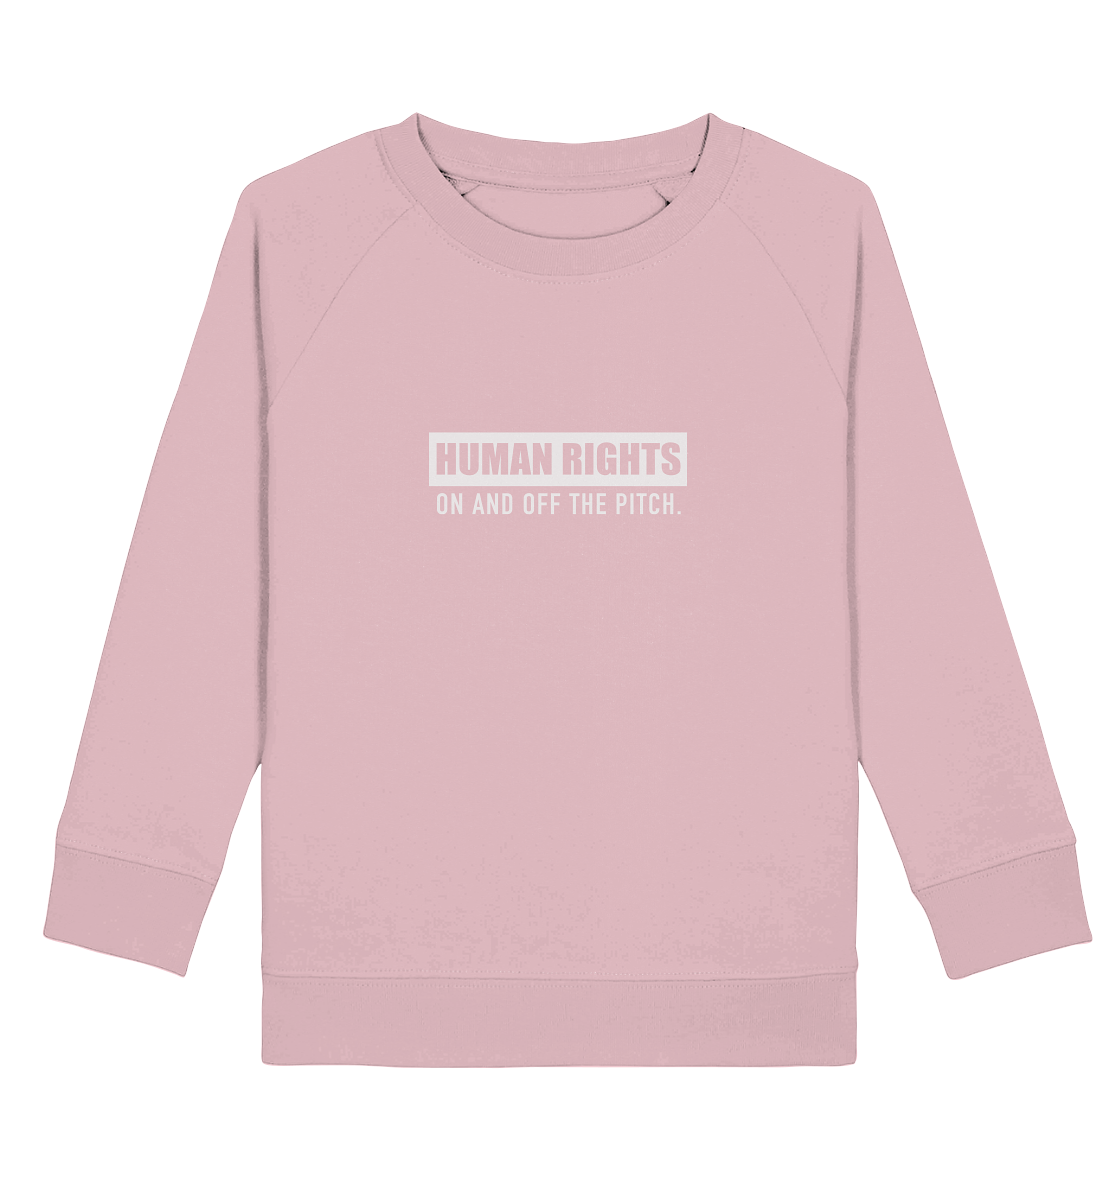 N.O.S.W. BLOCK Fanblock Sweater "HUMAN RIGHTS ON AND OFF THE PITCH" Kids UNISEX Organic Sweatshirt cotton pink